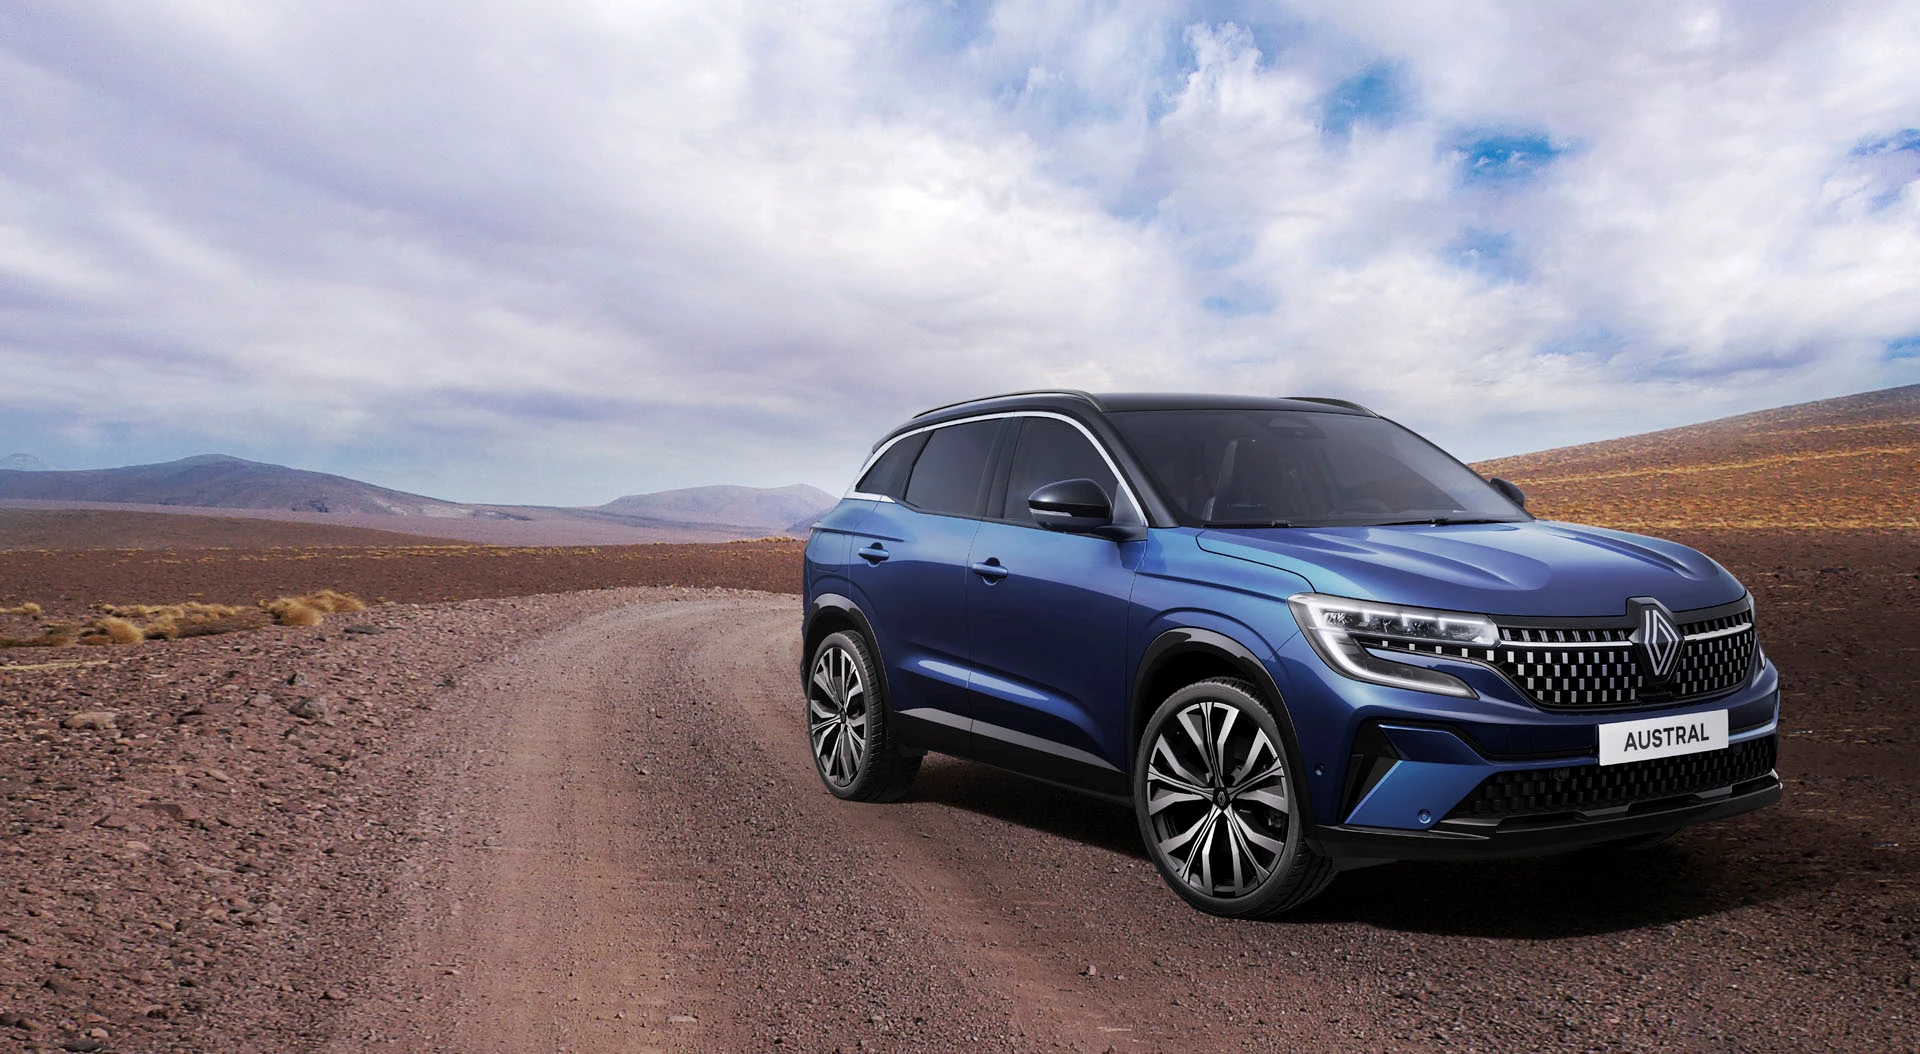 All New Renault Austral